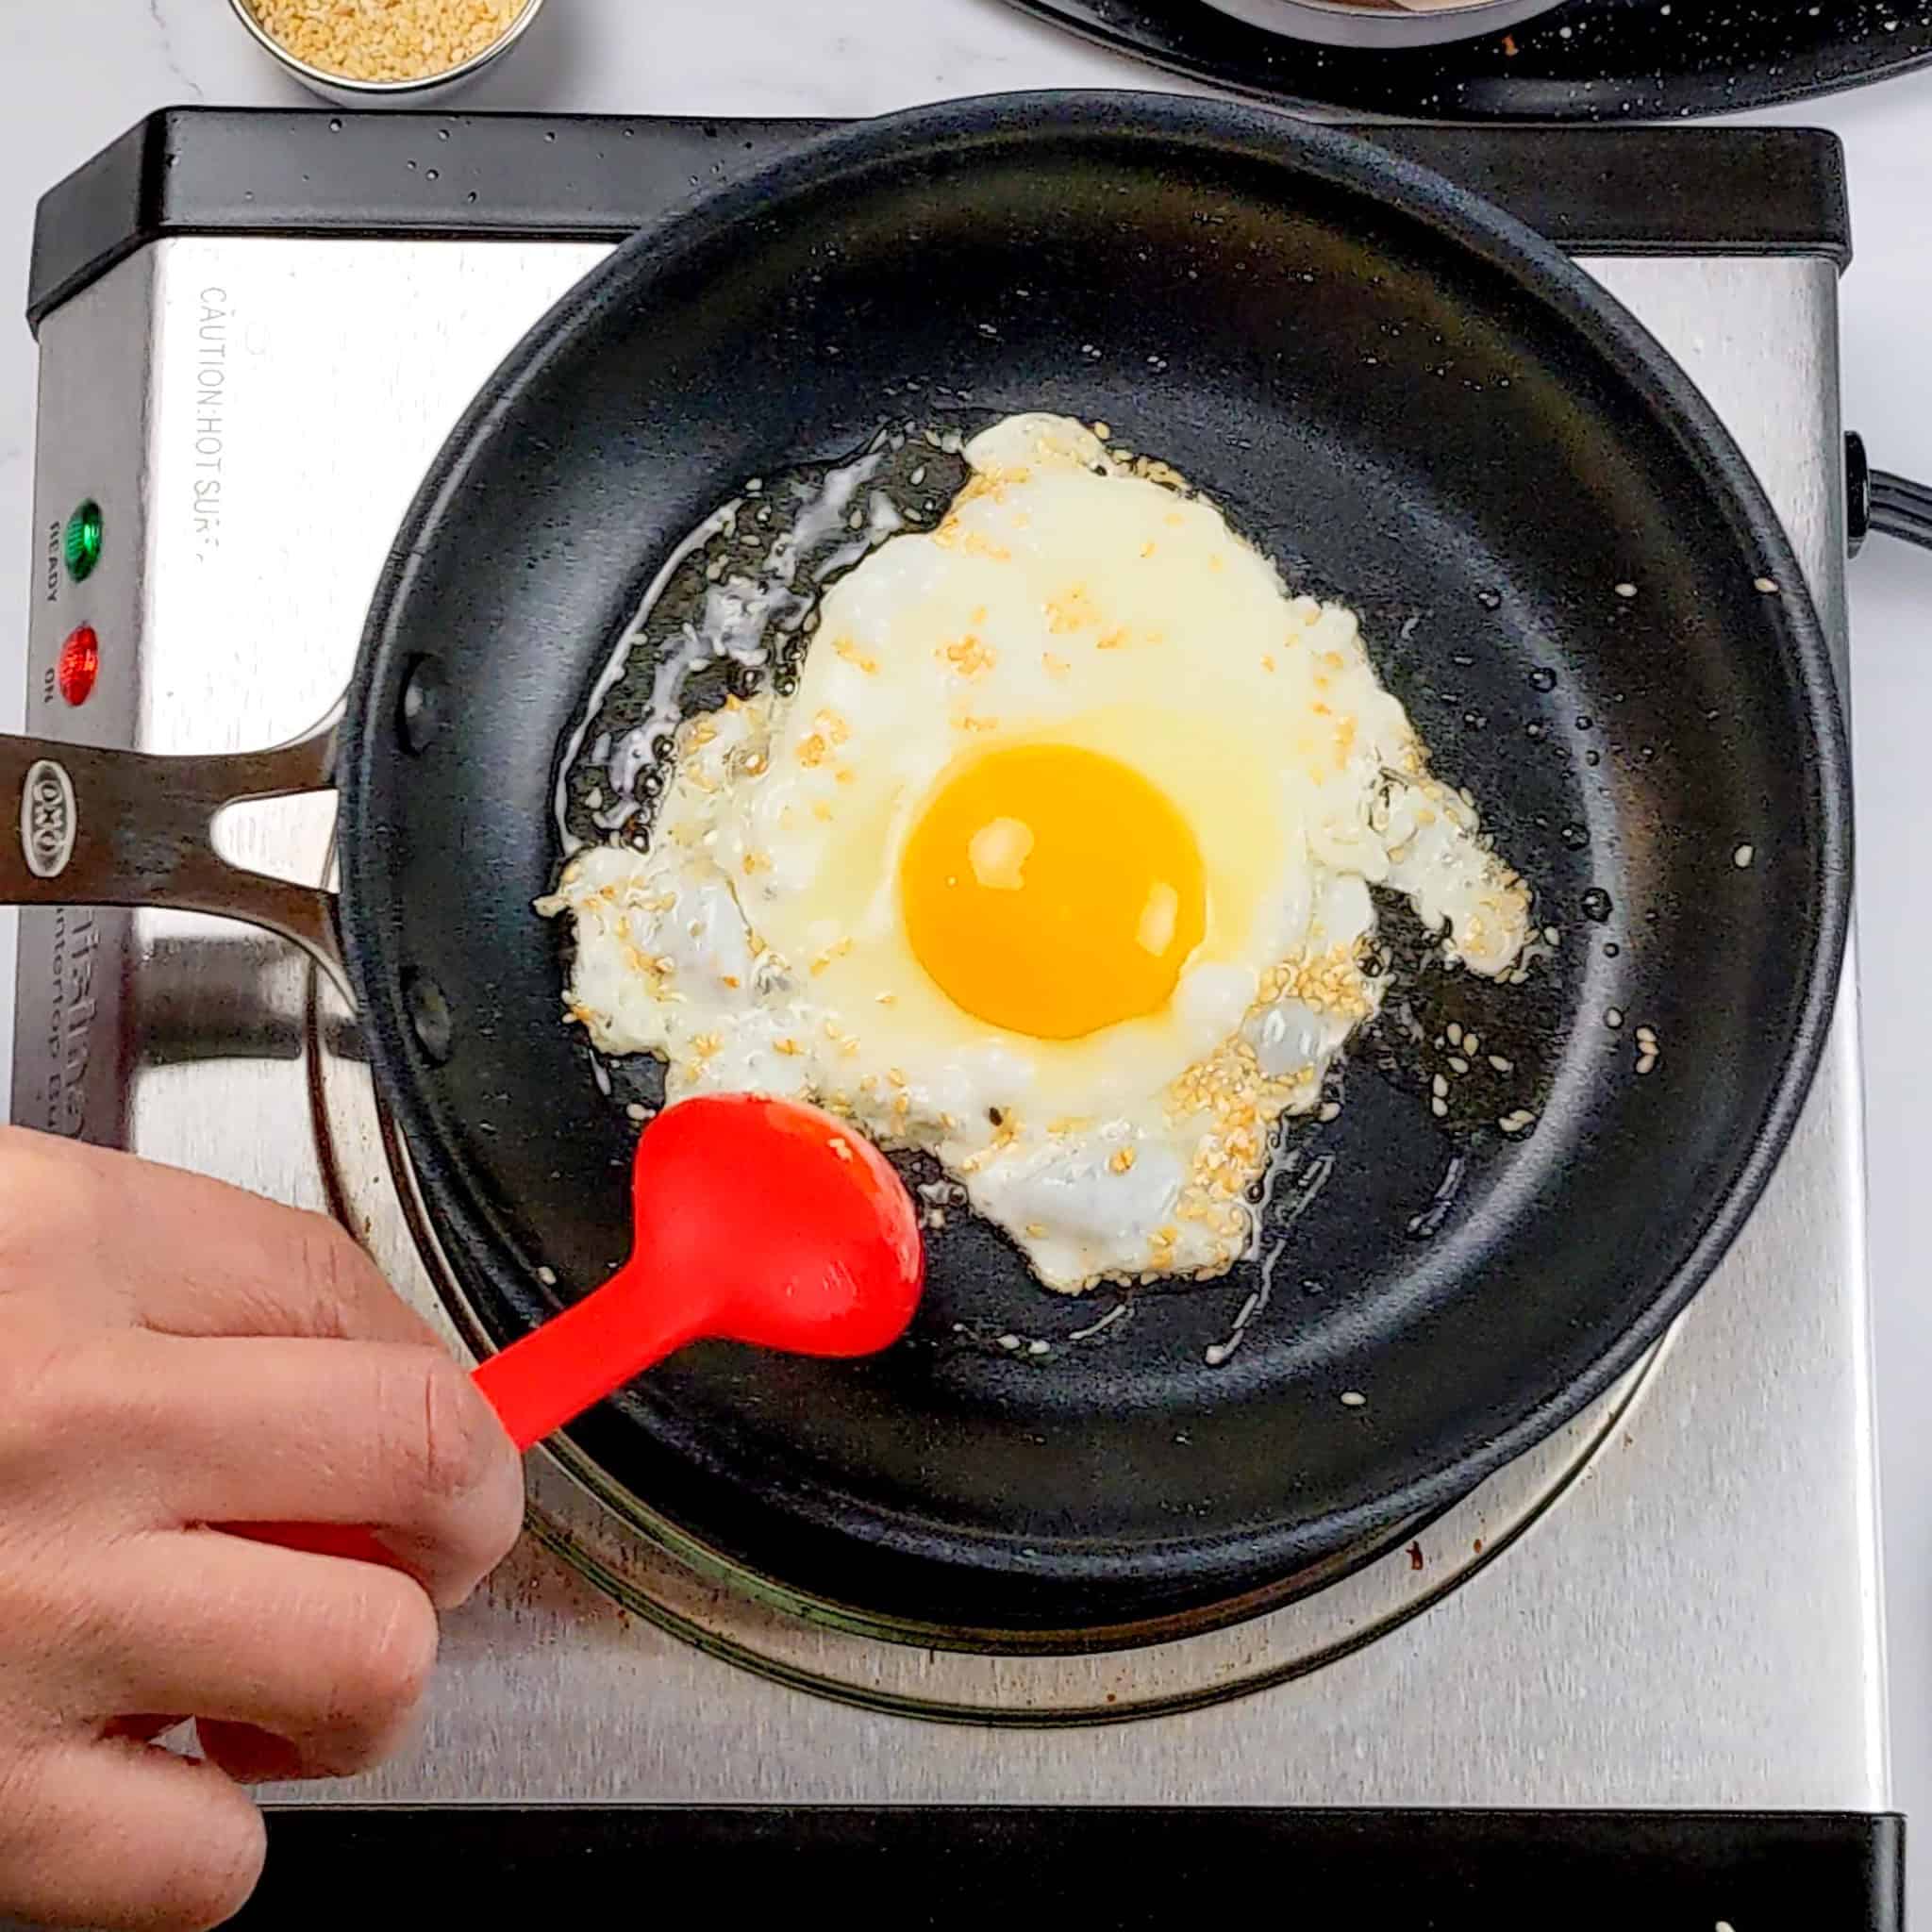 sesame seeds and oil being spooned over the fried sunny side egg with a silicone spoon made by GIR.